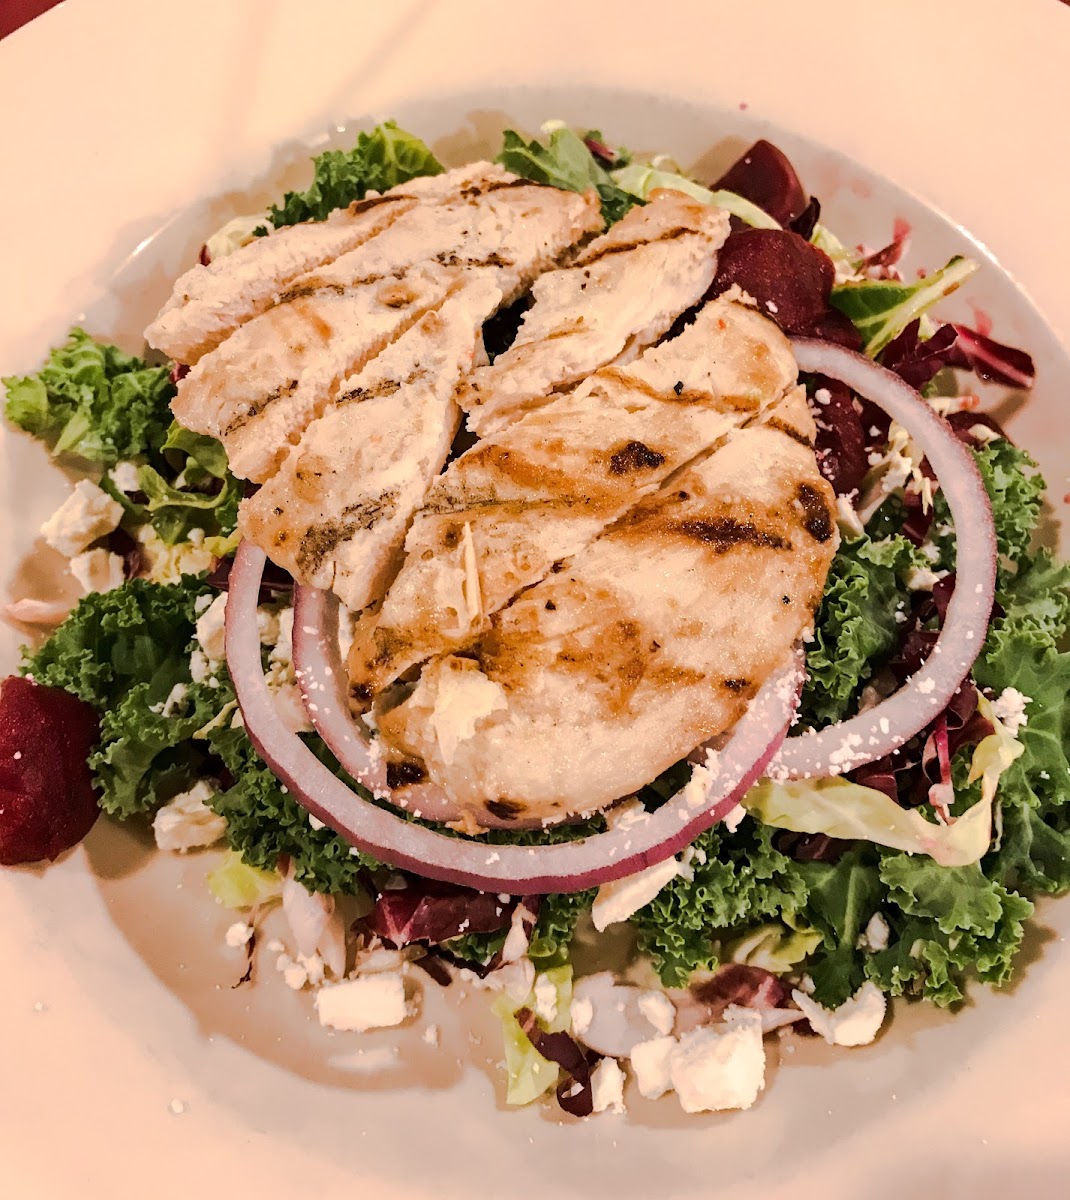 Superfood salad with beets, kale, red onion & grilled chicken.